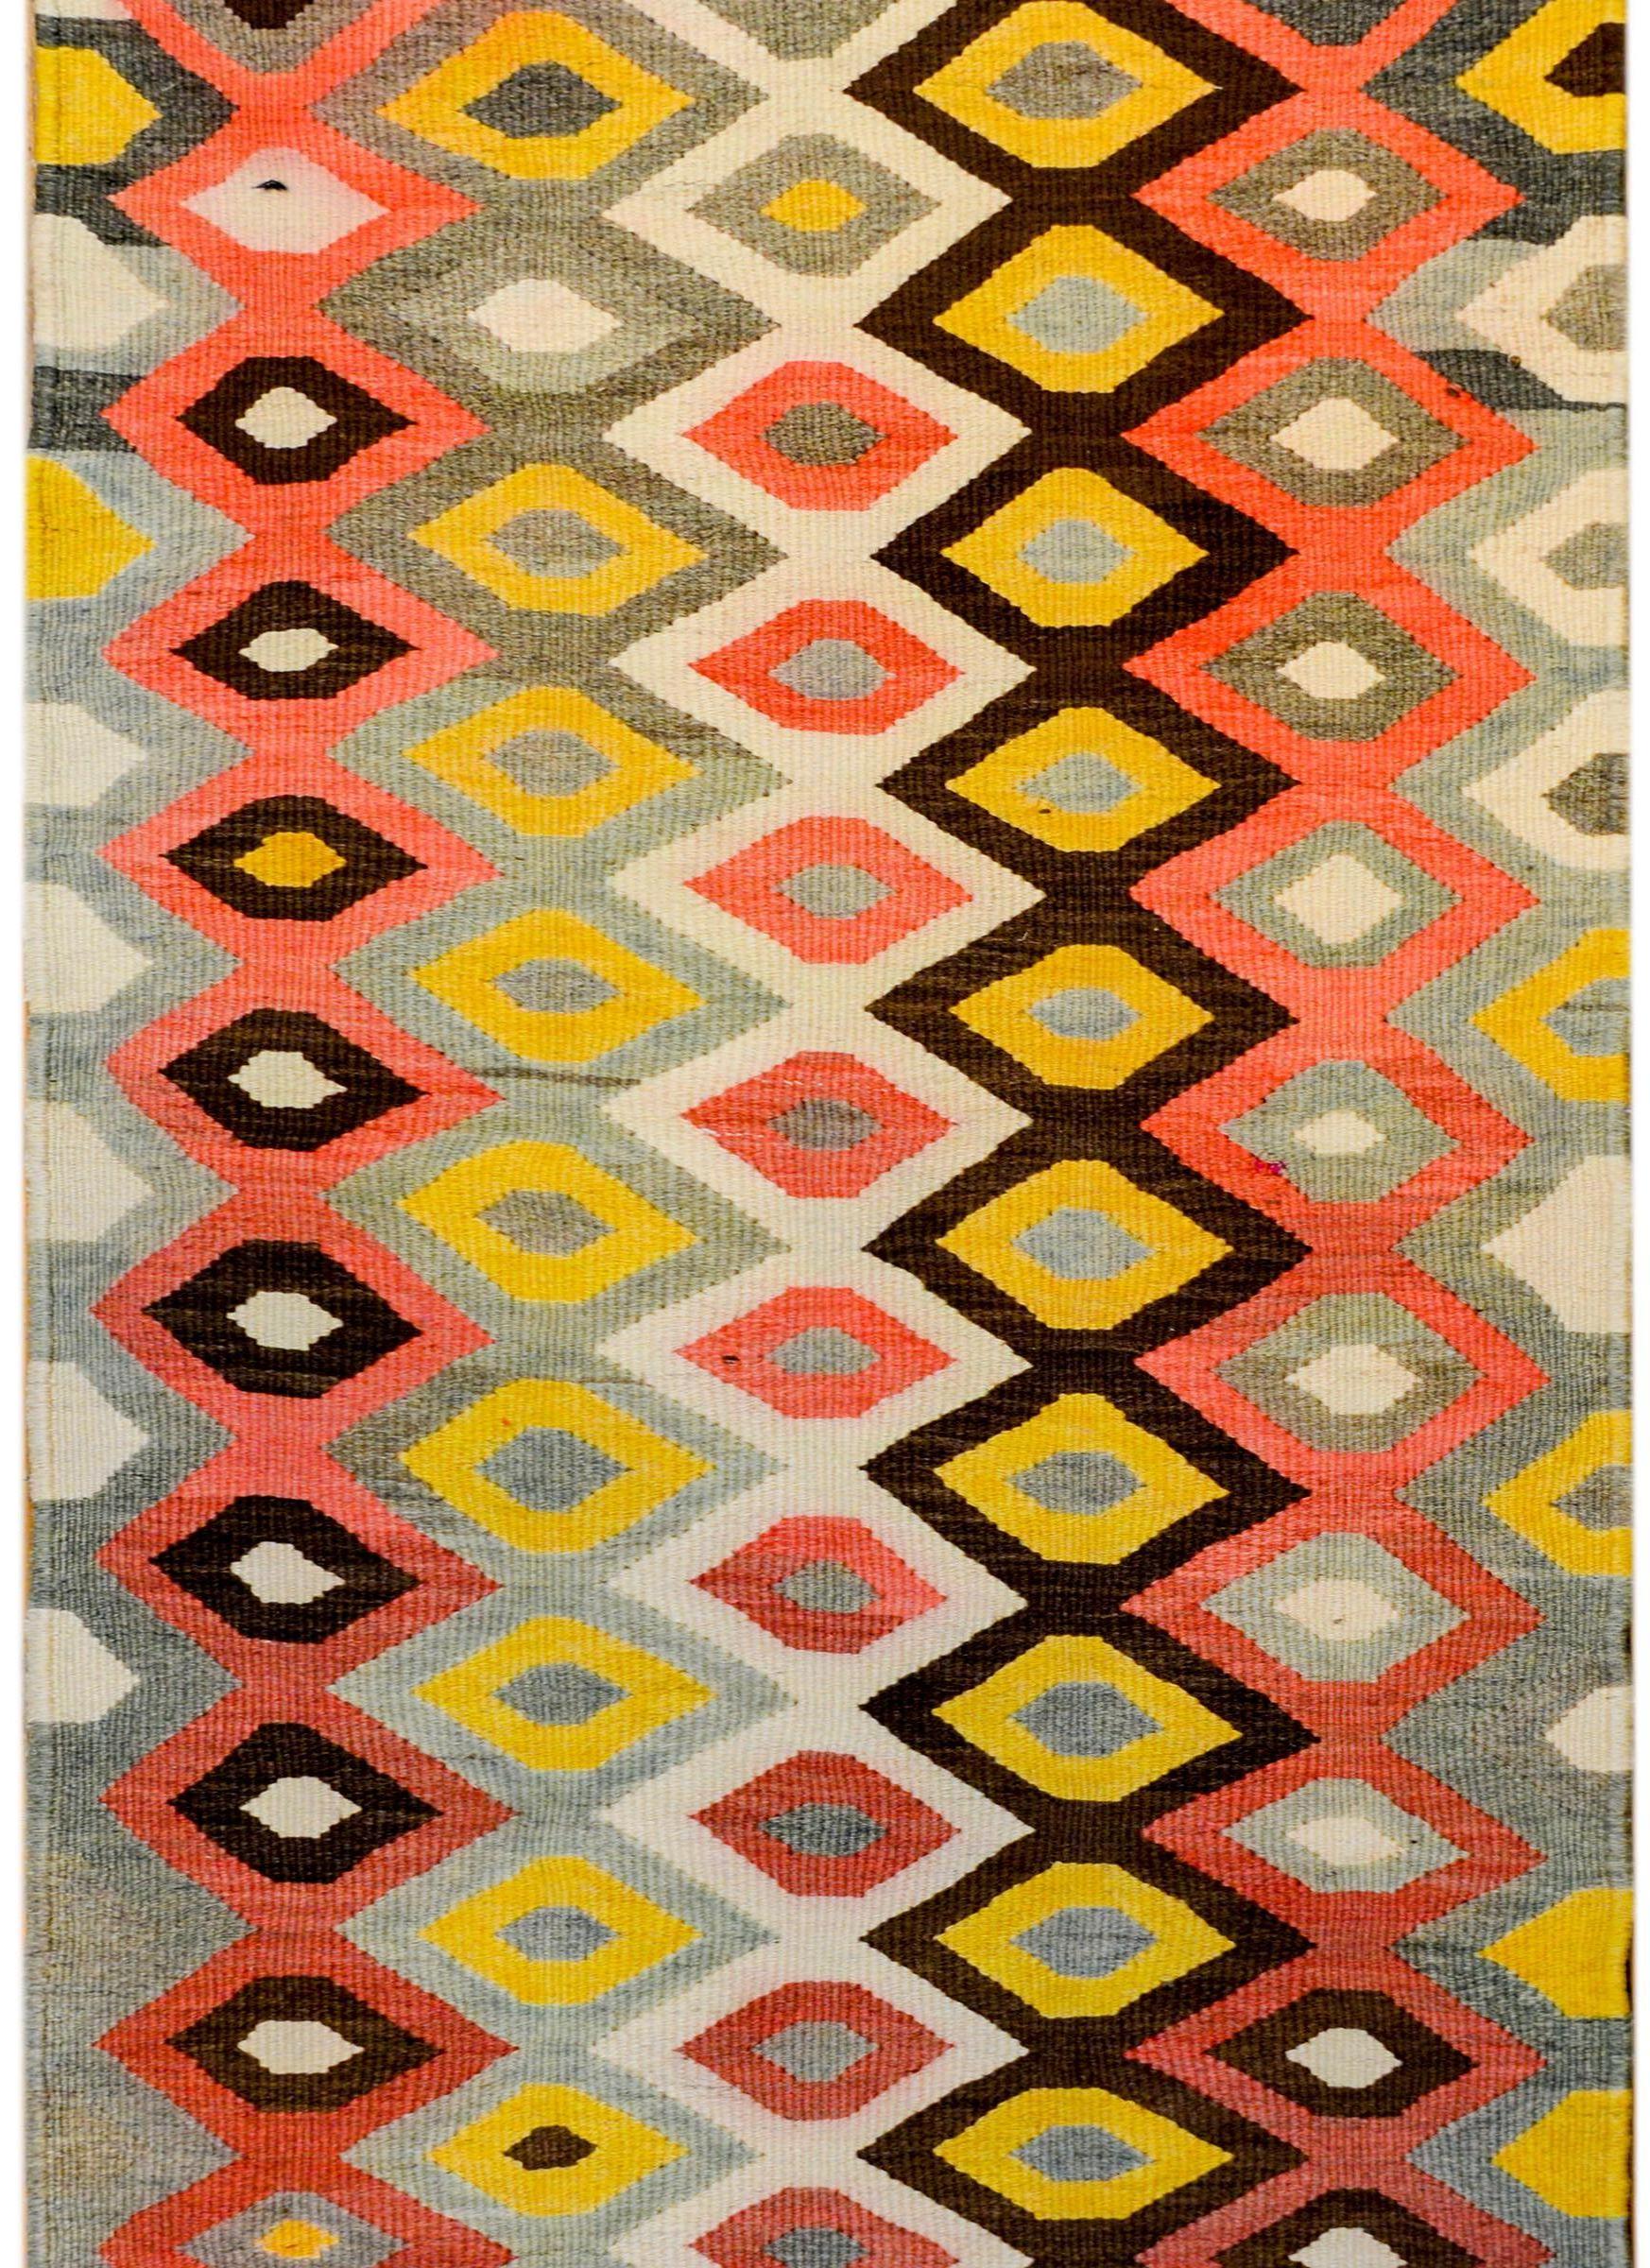 A bold mid-20th century Zarand Kilim rug with a fantastic large-scale diamond pattern woven in brown, gold, white, grey, and pink colored vegetable dyed wool. There is no traditional border, but the 